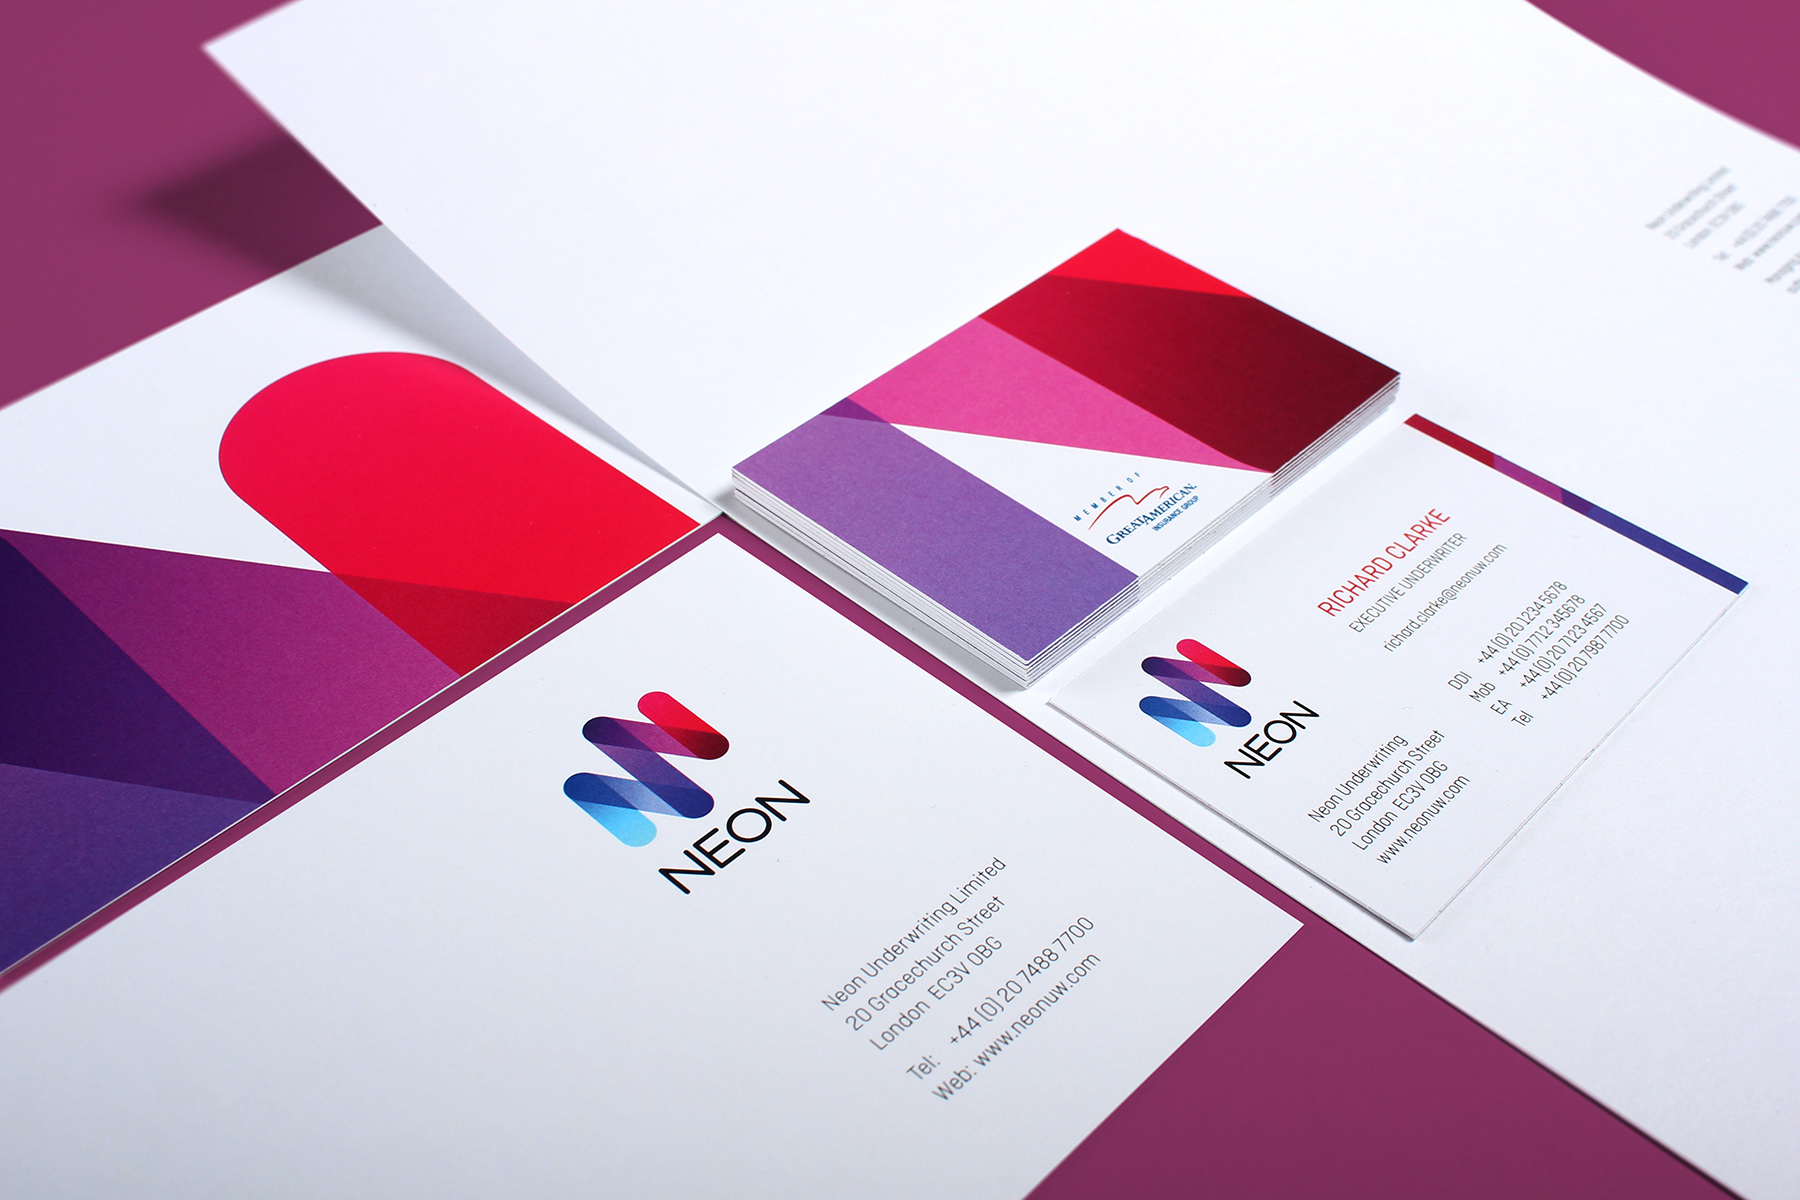 The print and stationery look and feel is simple, bright and bold. We utilised a contemporary rounded germanic font to add to the overall feel.